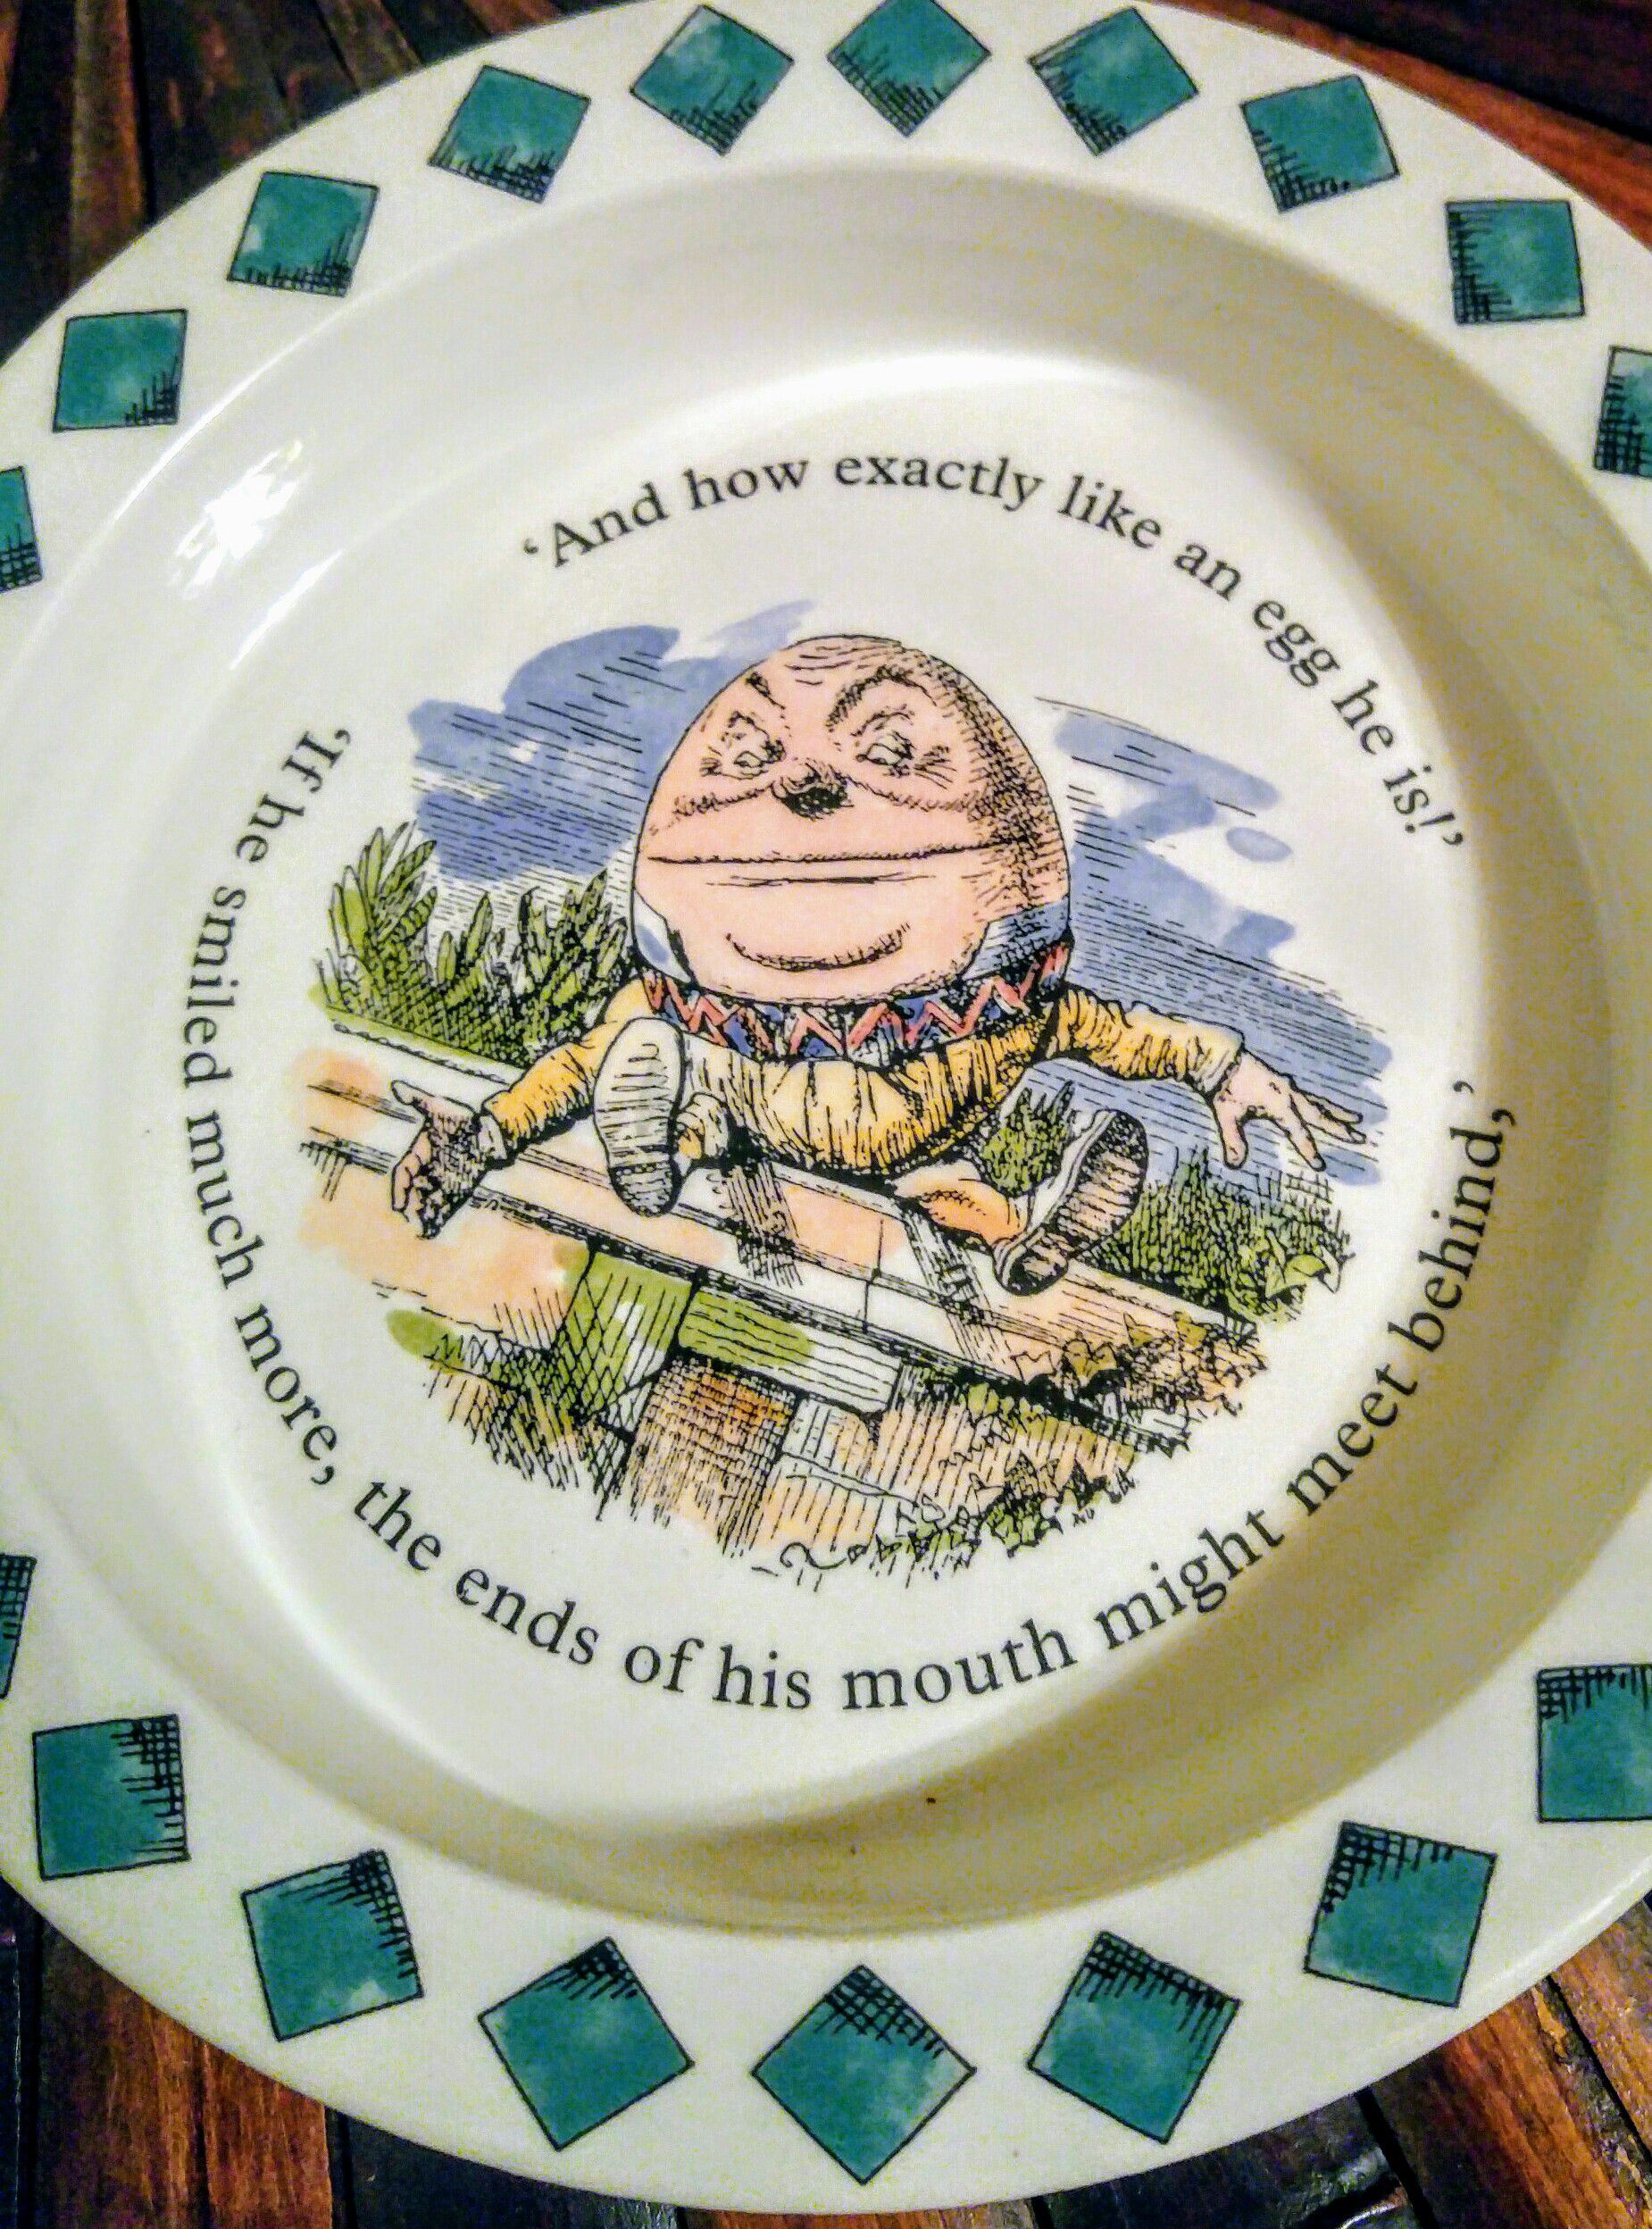 The Mad Hatters Tea party,bowl and sauser.